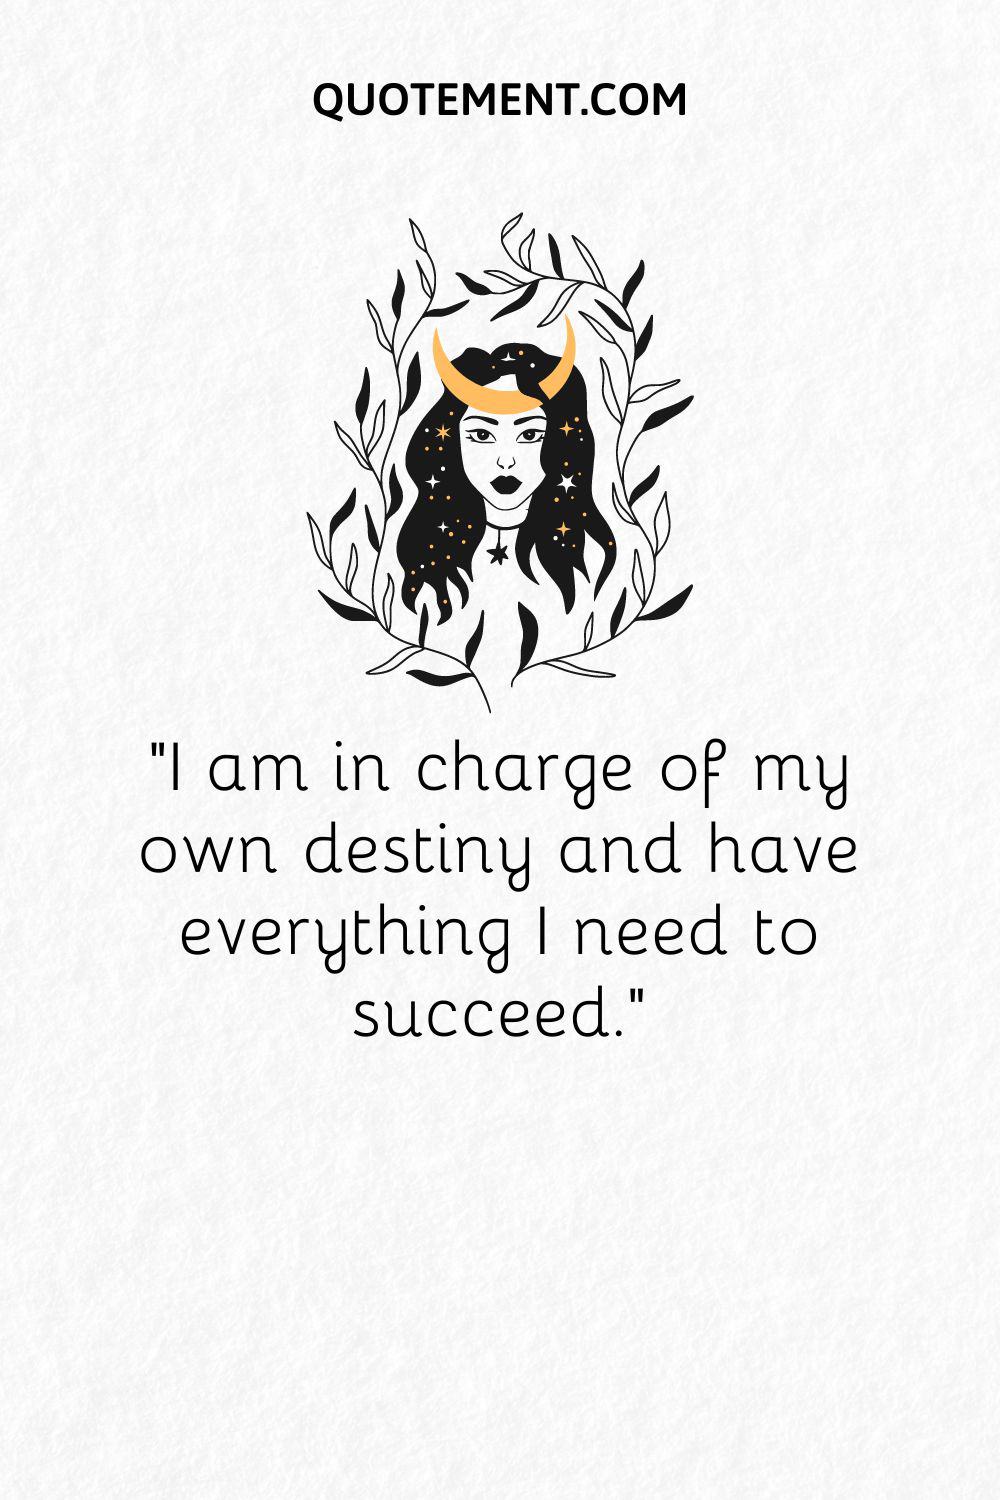 I am in charge of my own destiny and have everything I need to succeed